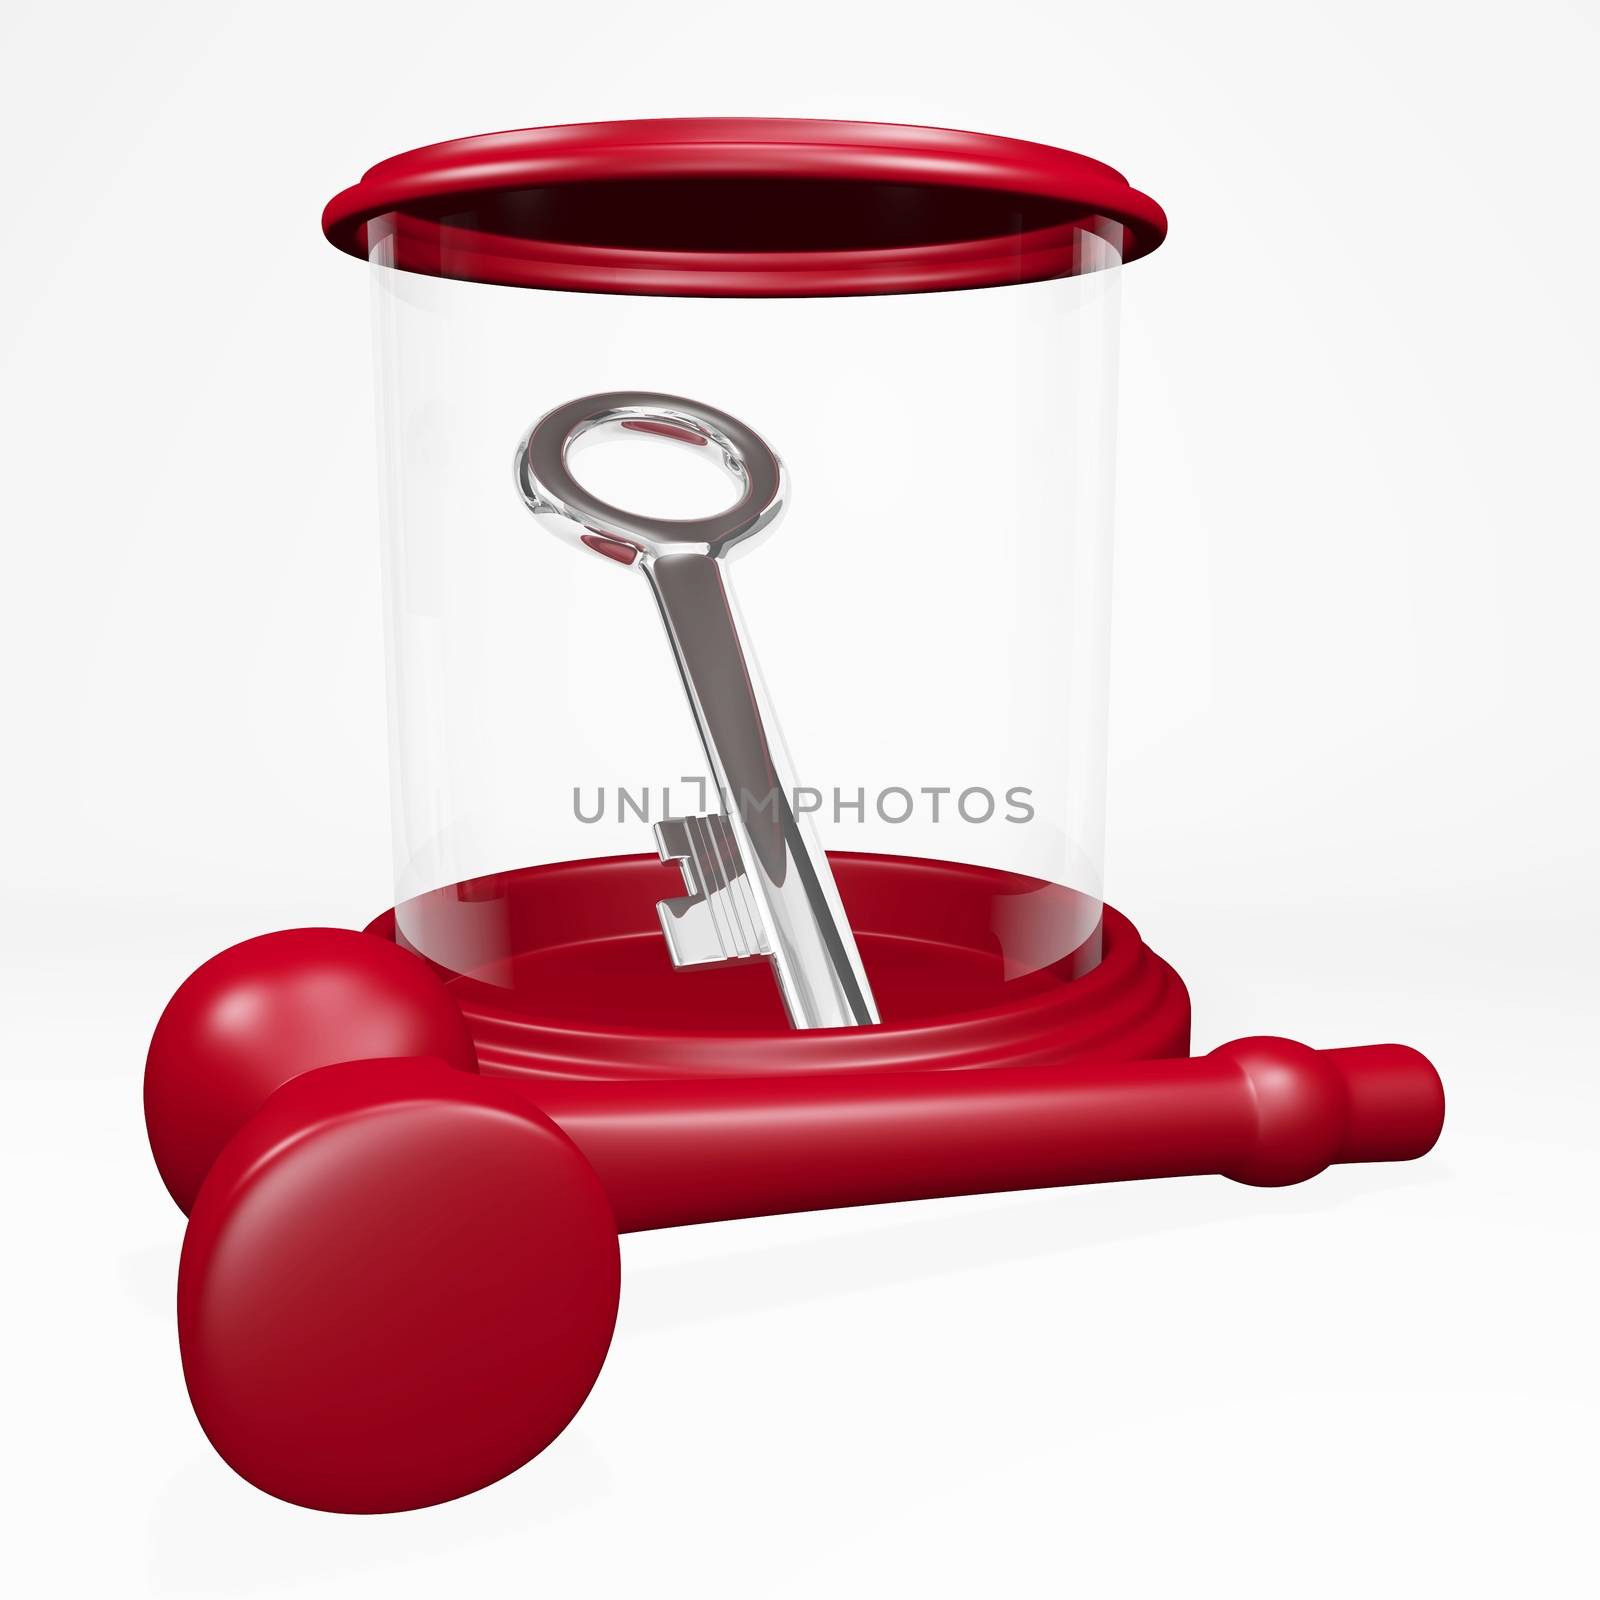 Key in Glass Case with Hammer by RichieThakur